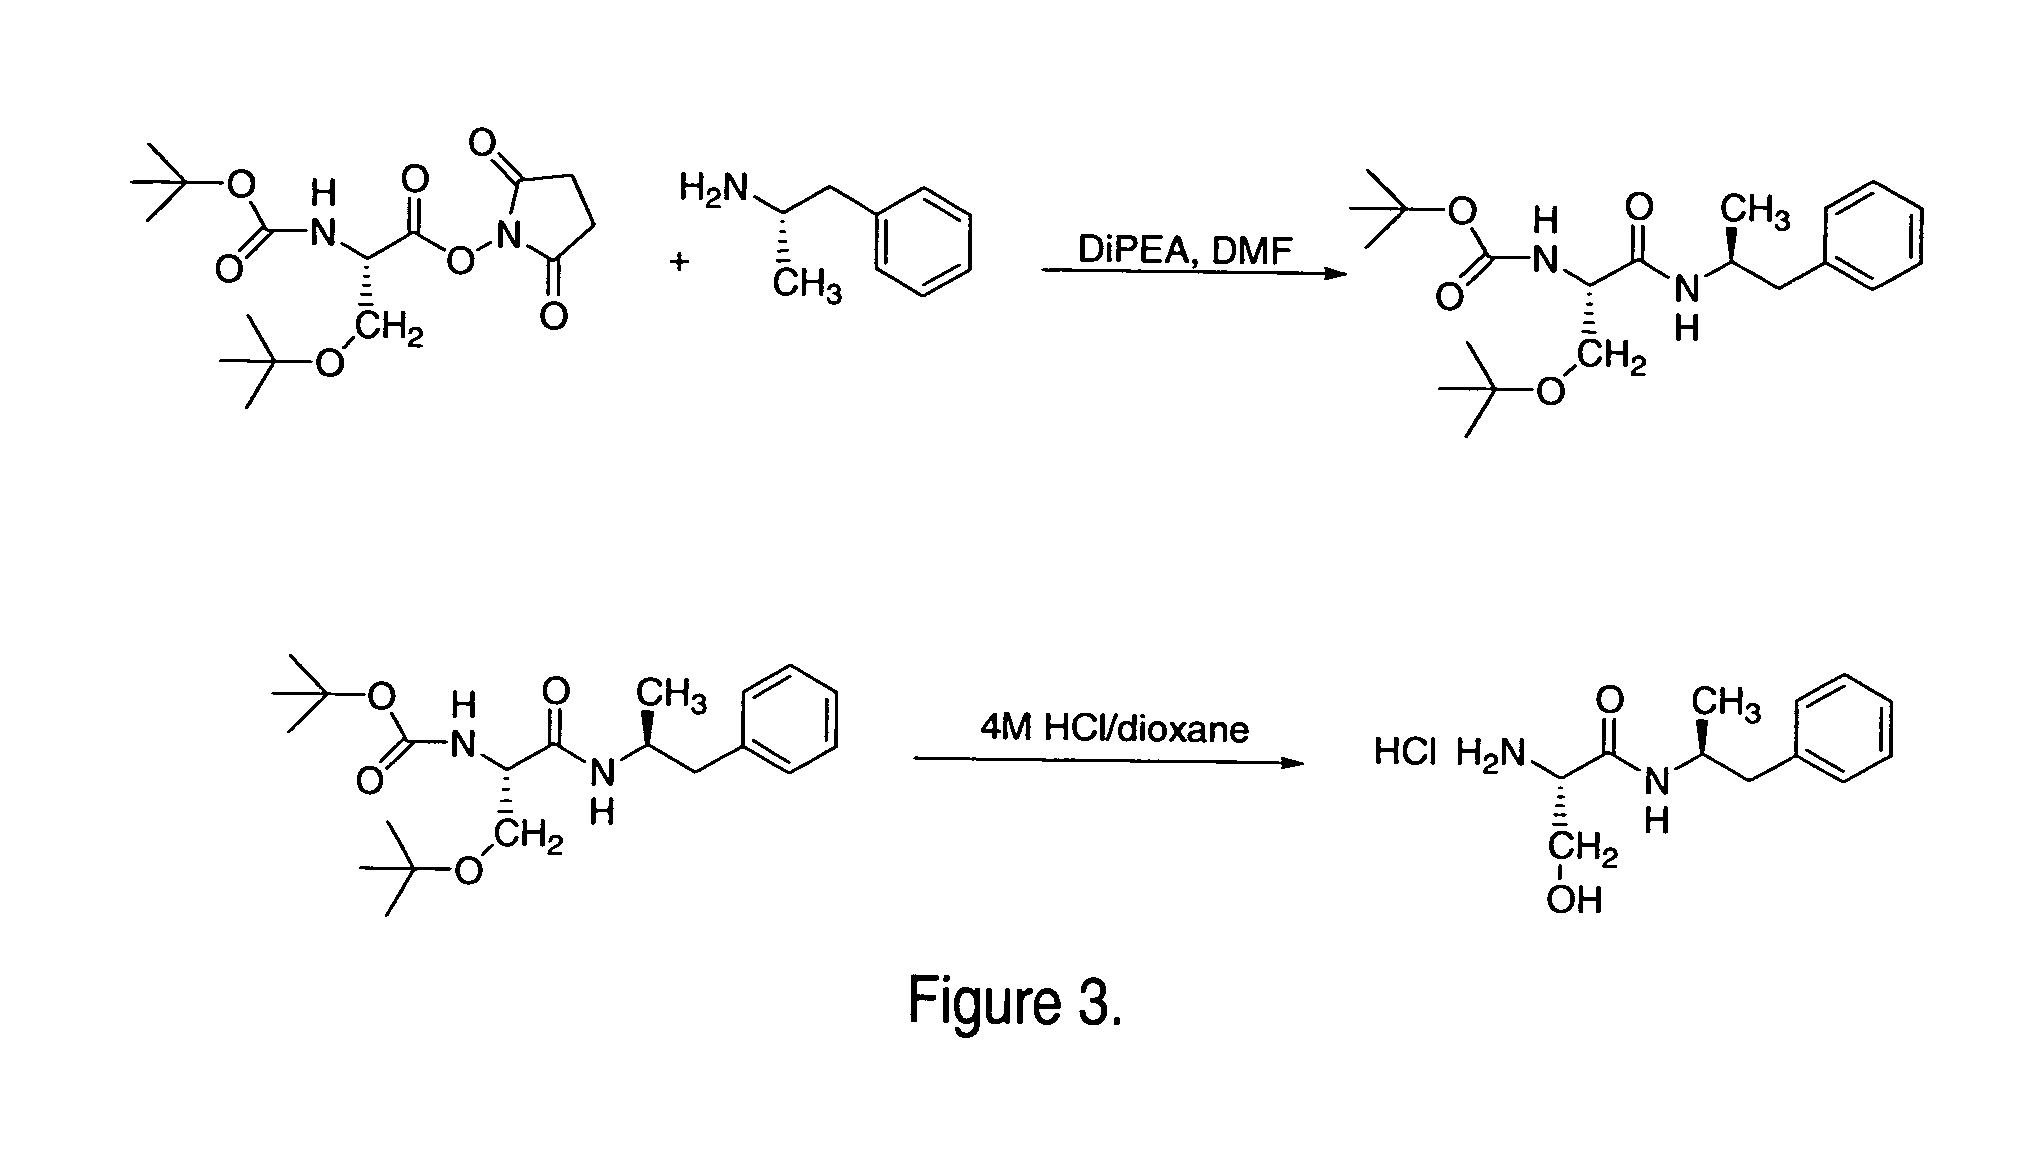 Abuse-resistant amphetamine compounds